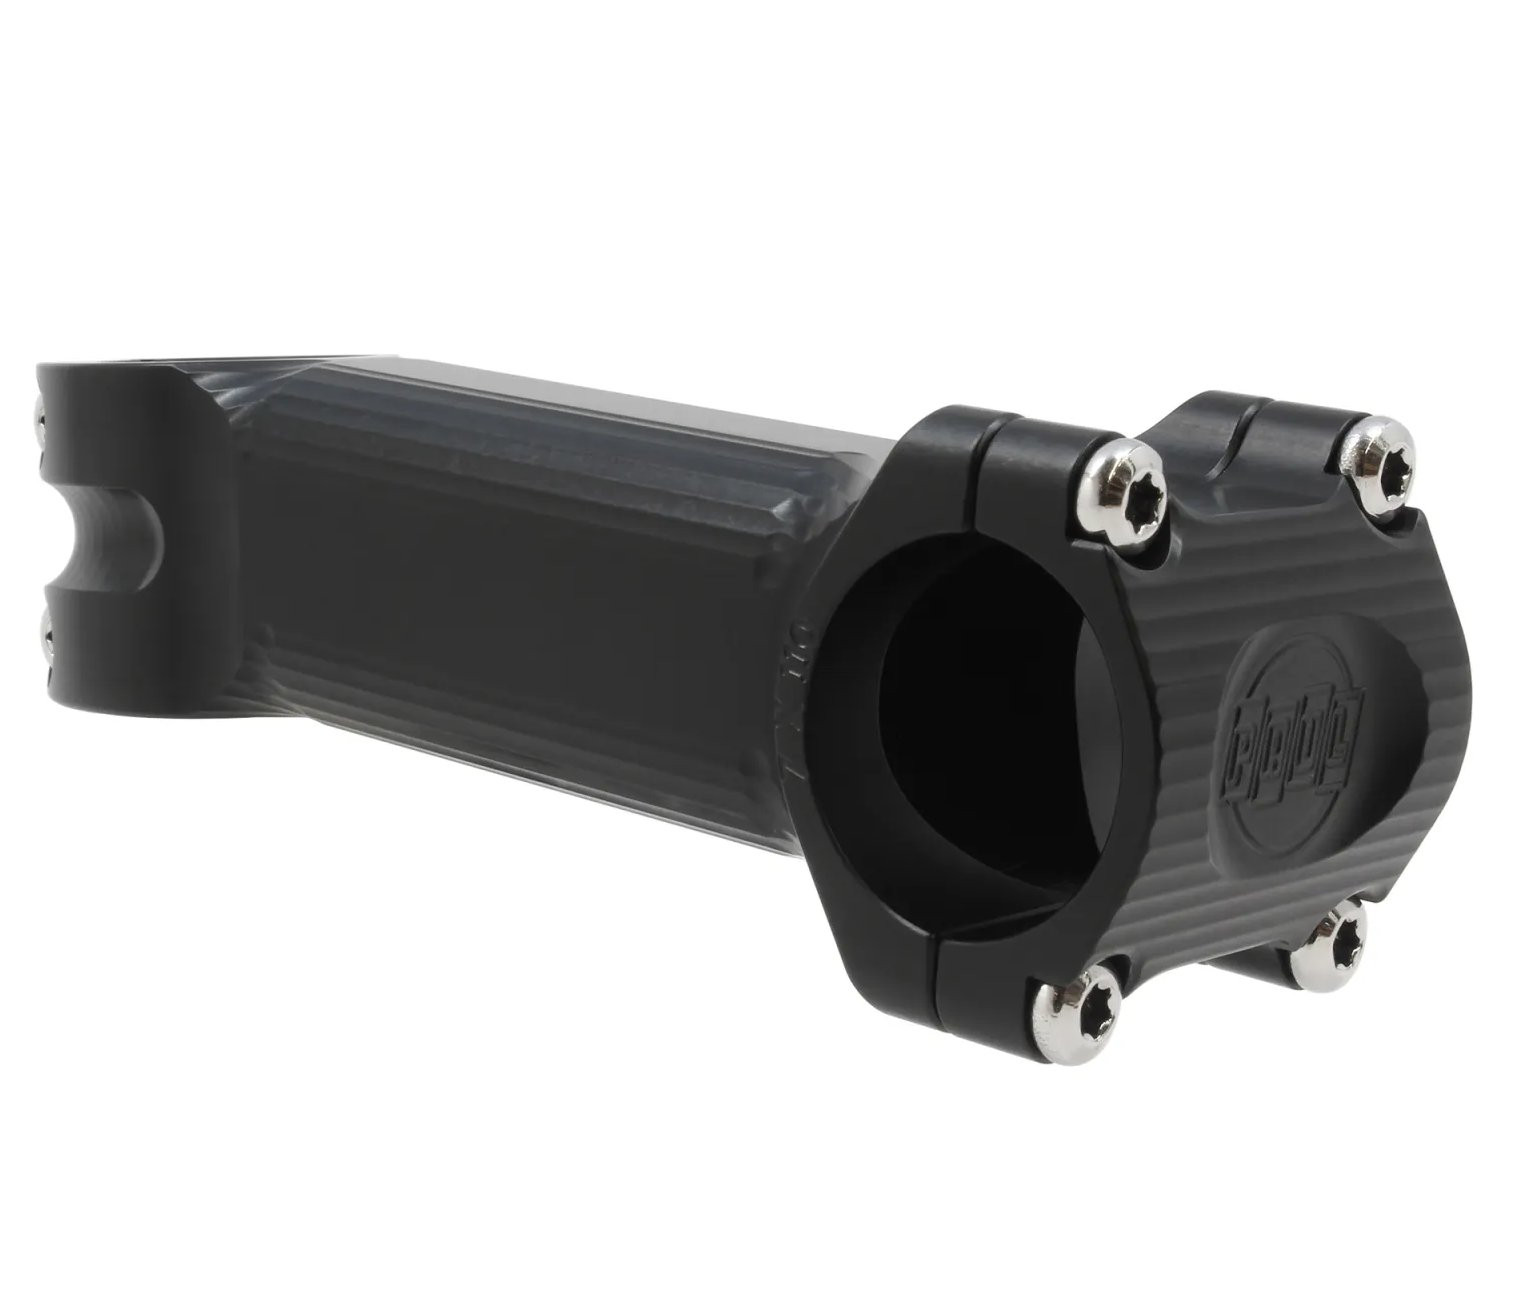 Paul Components Boxcar Stem - 7 Degrees